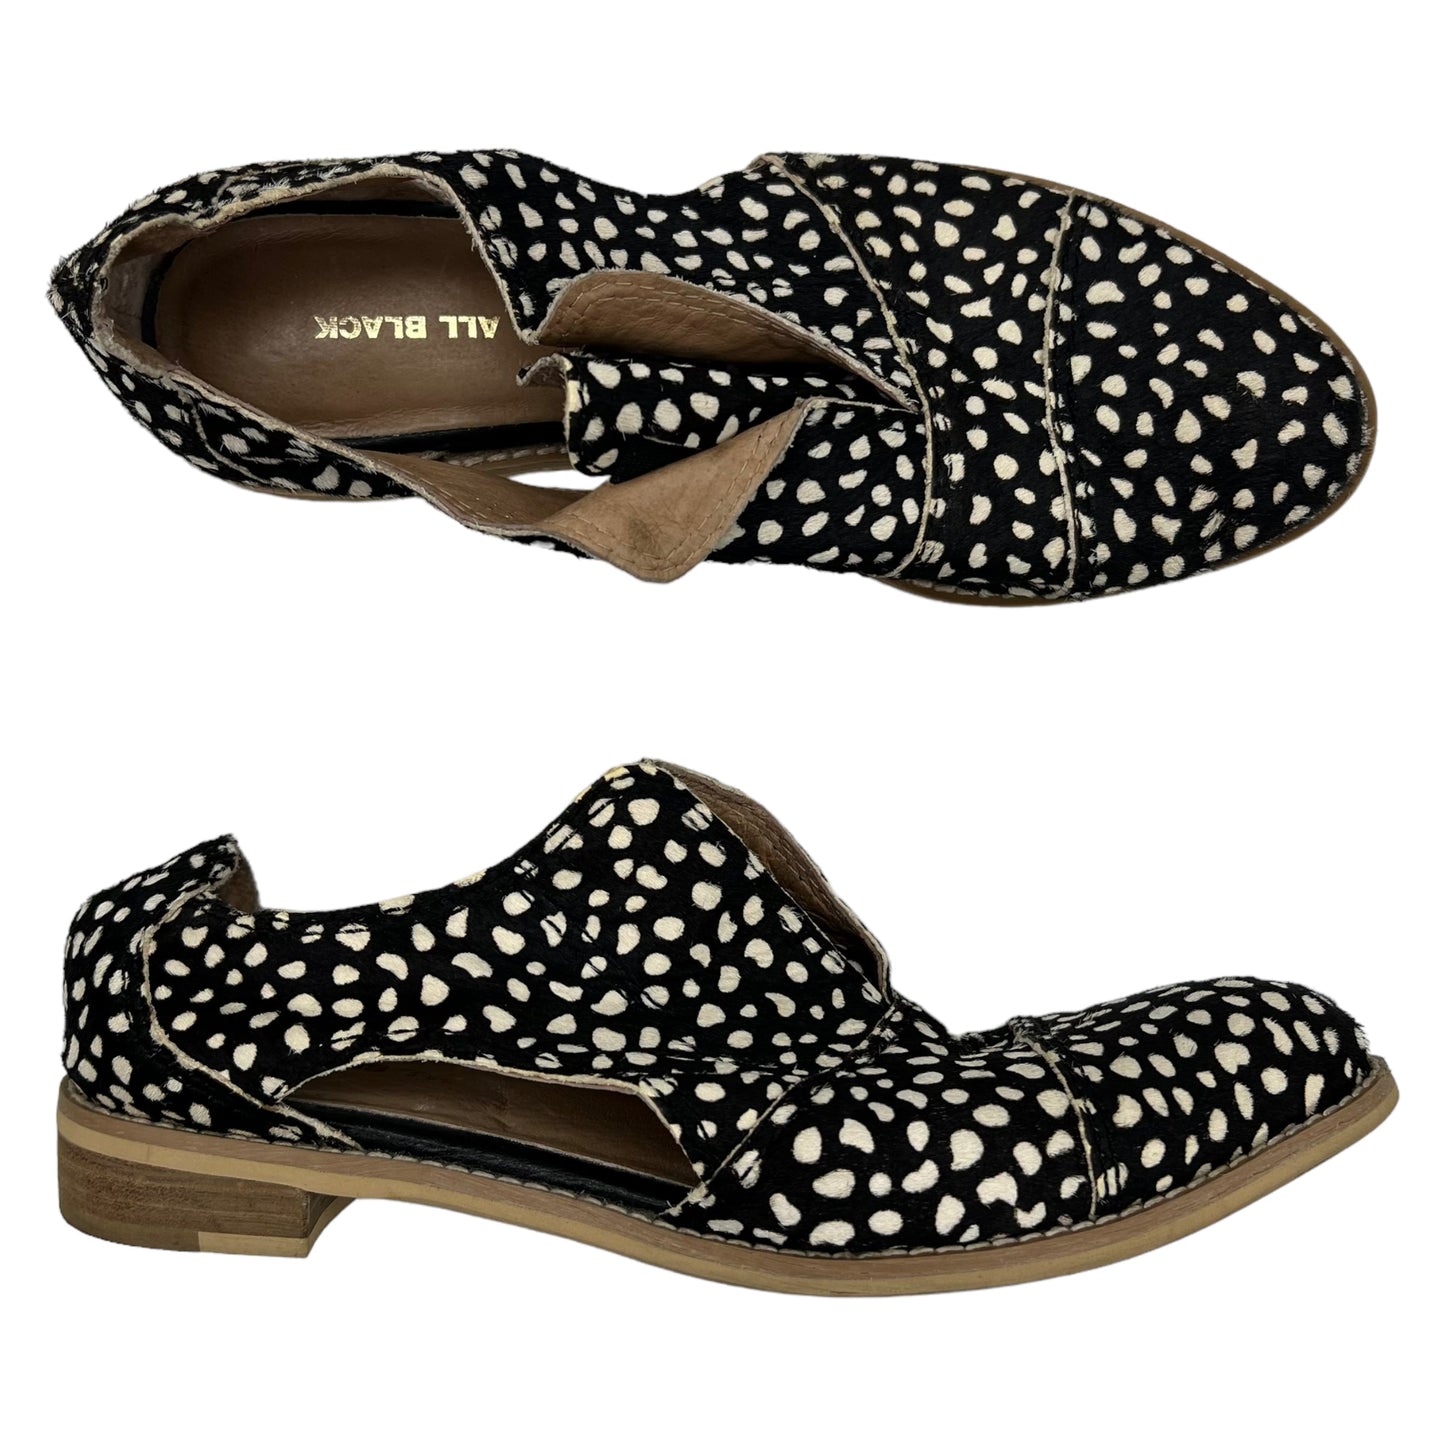 Shoes Flats By Clothes Mentor  Size: 6.5